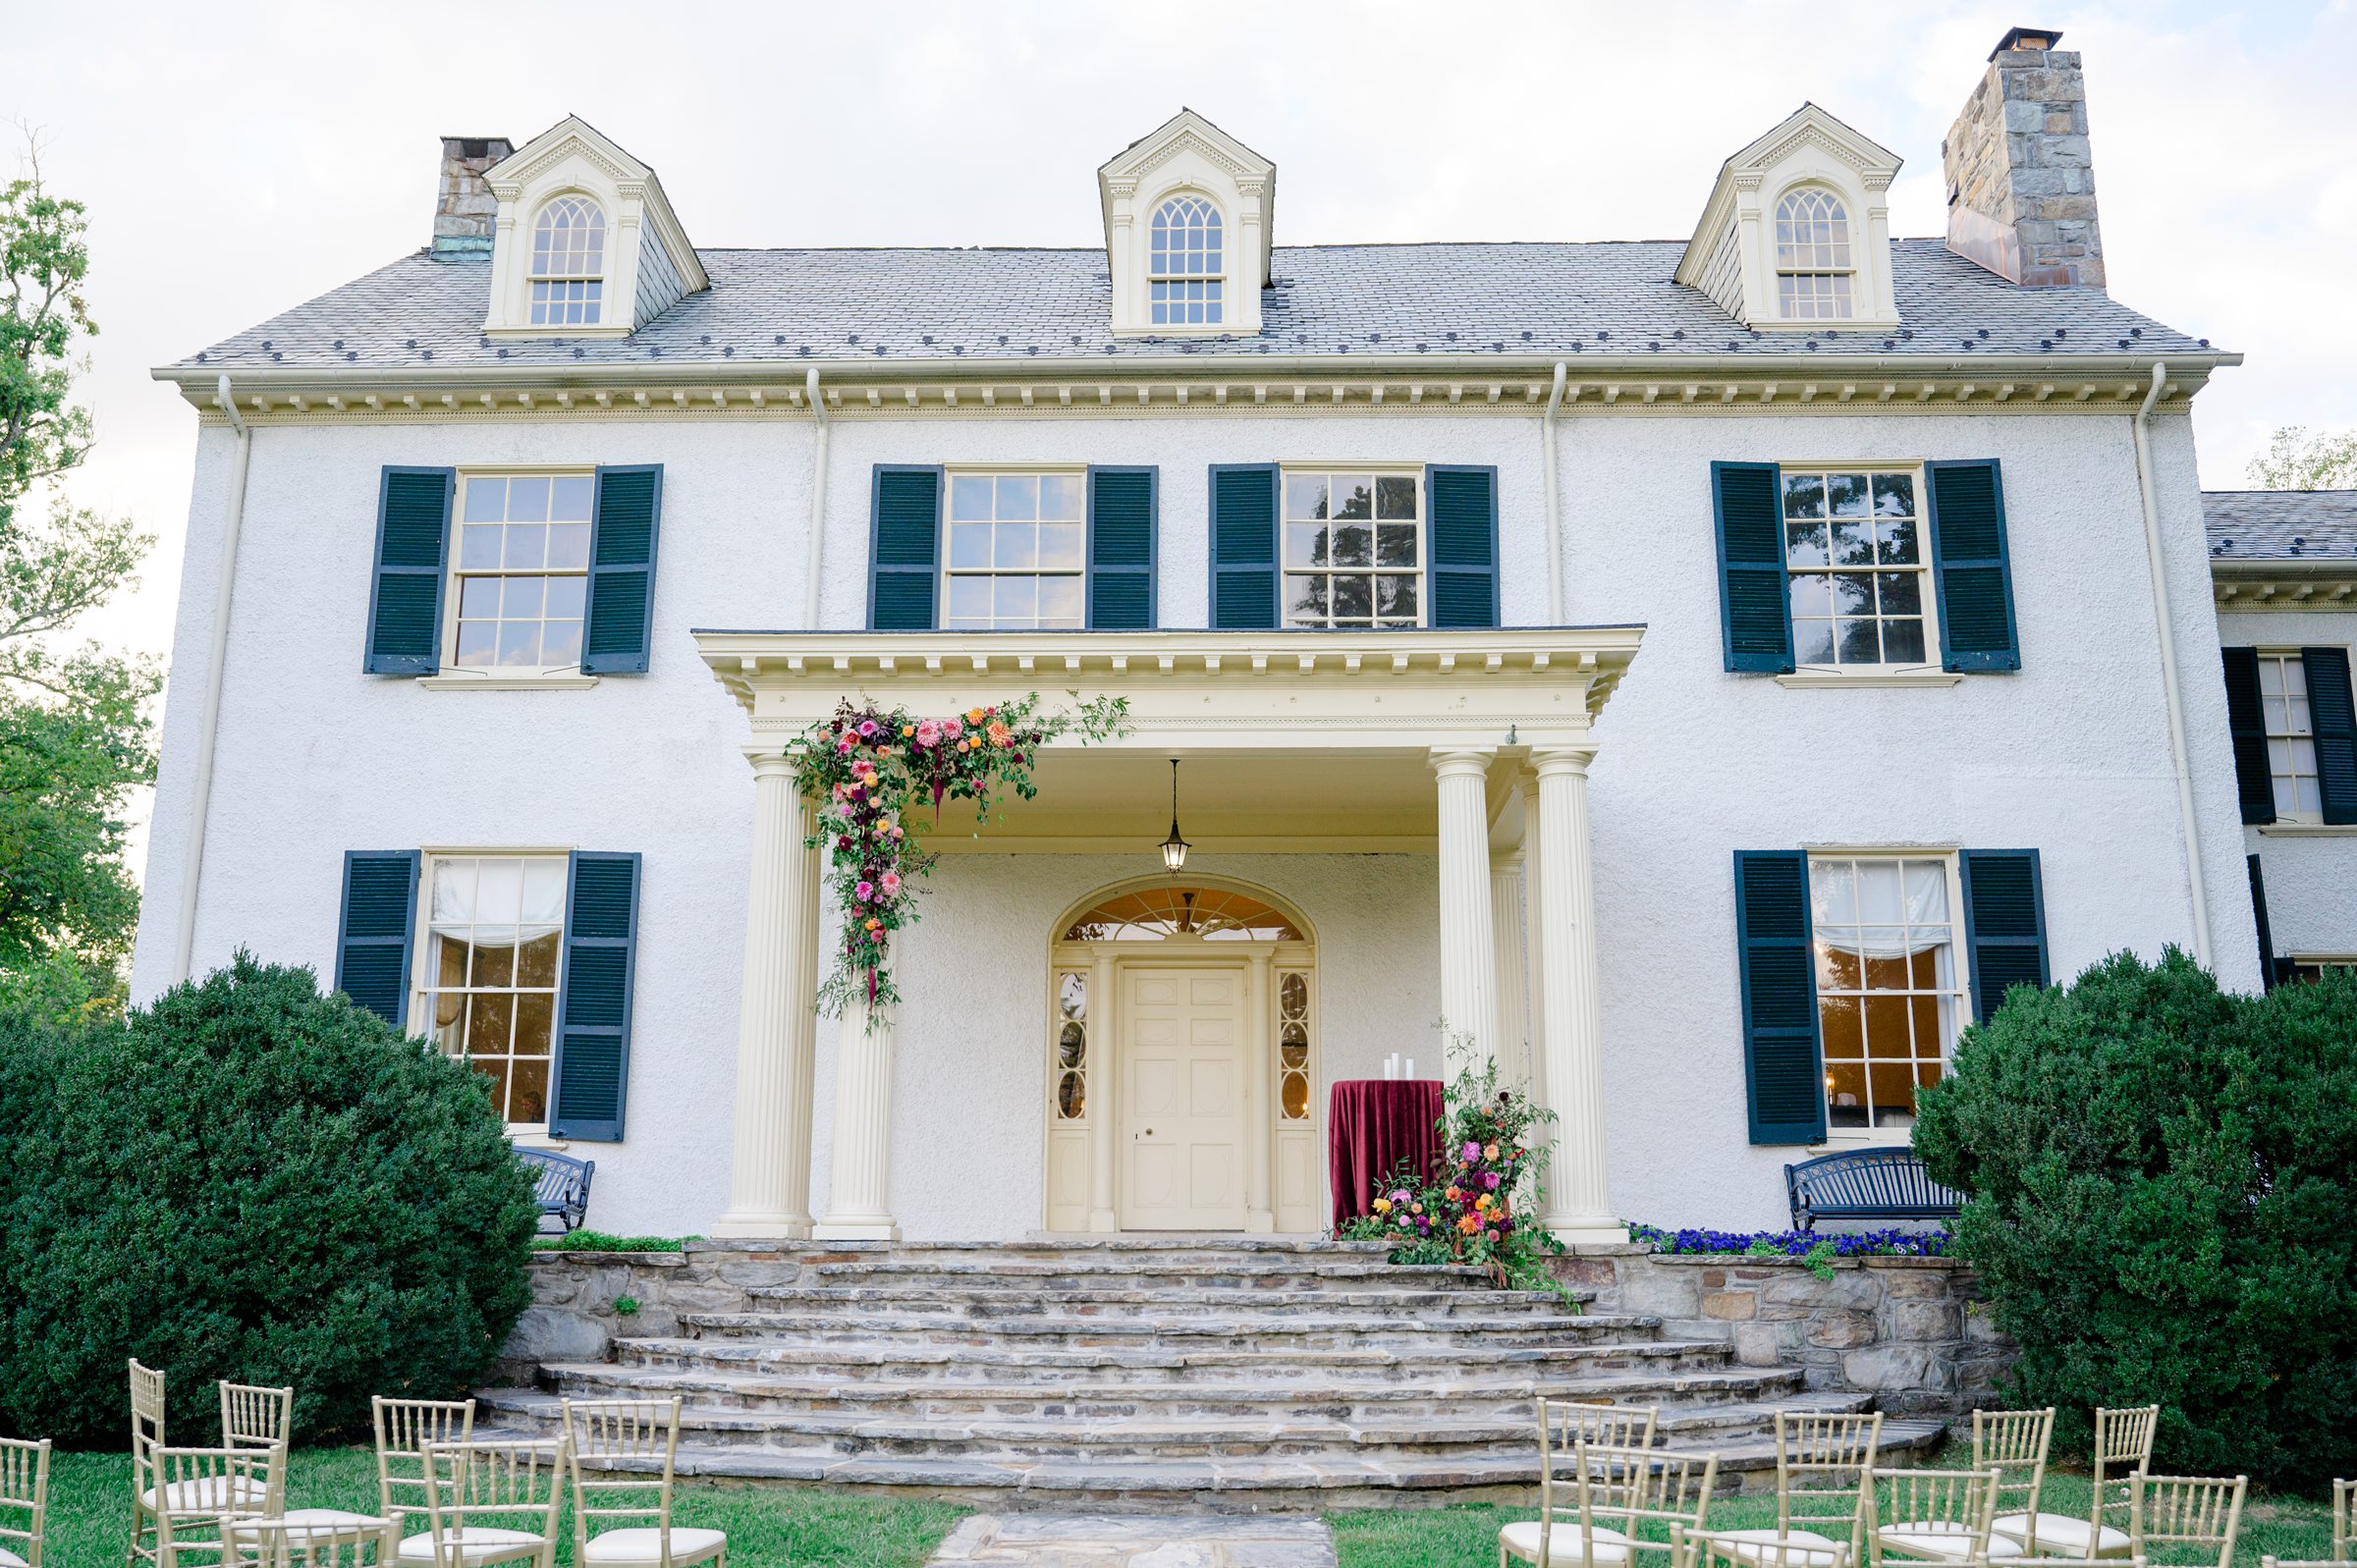 Colorful styled shoot at Rust Manor House photographed by Queer Affirming Wedding Photographer in Baltimore Cait Kramer.